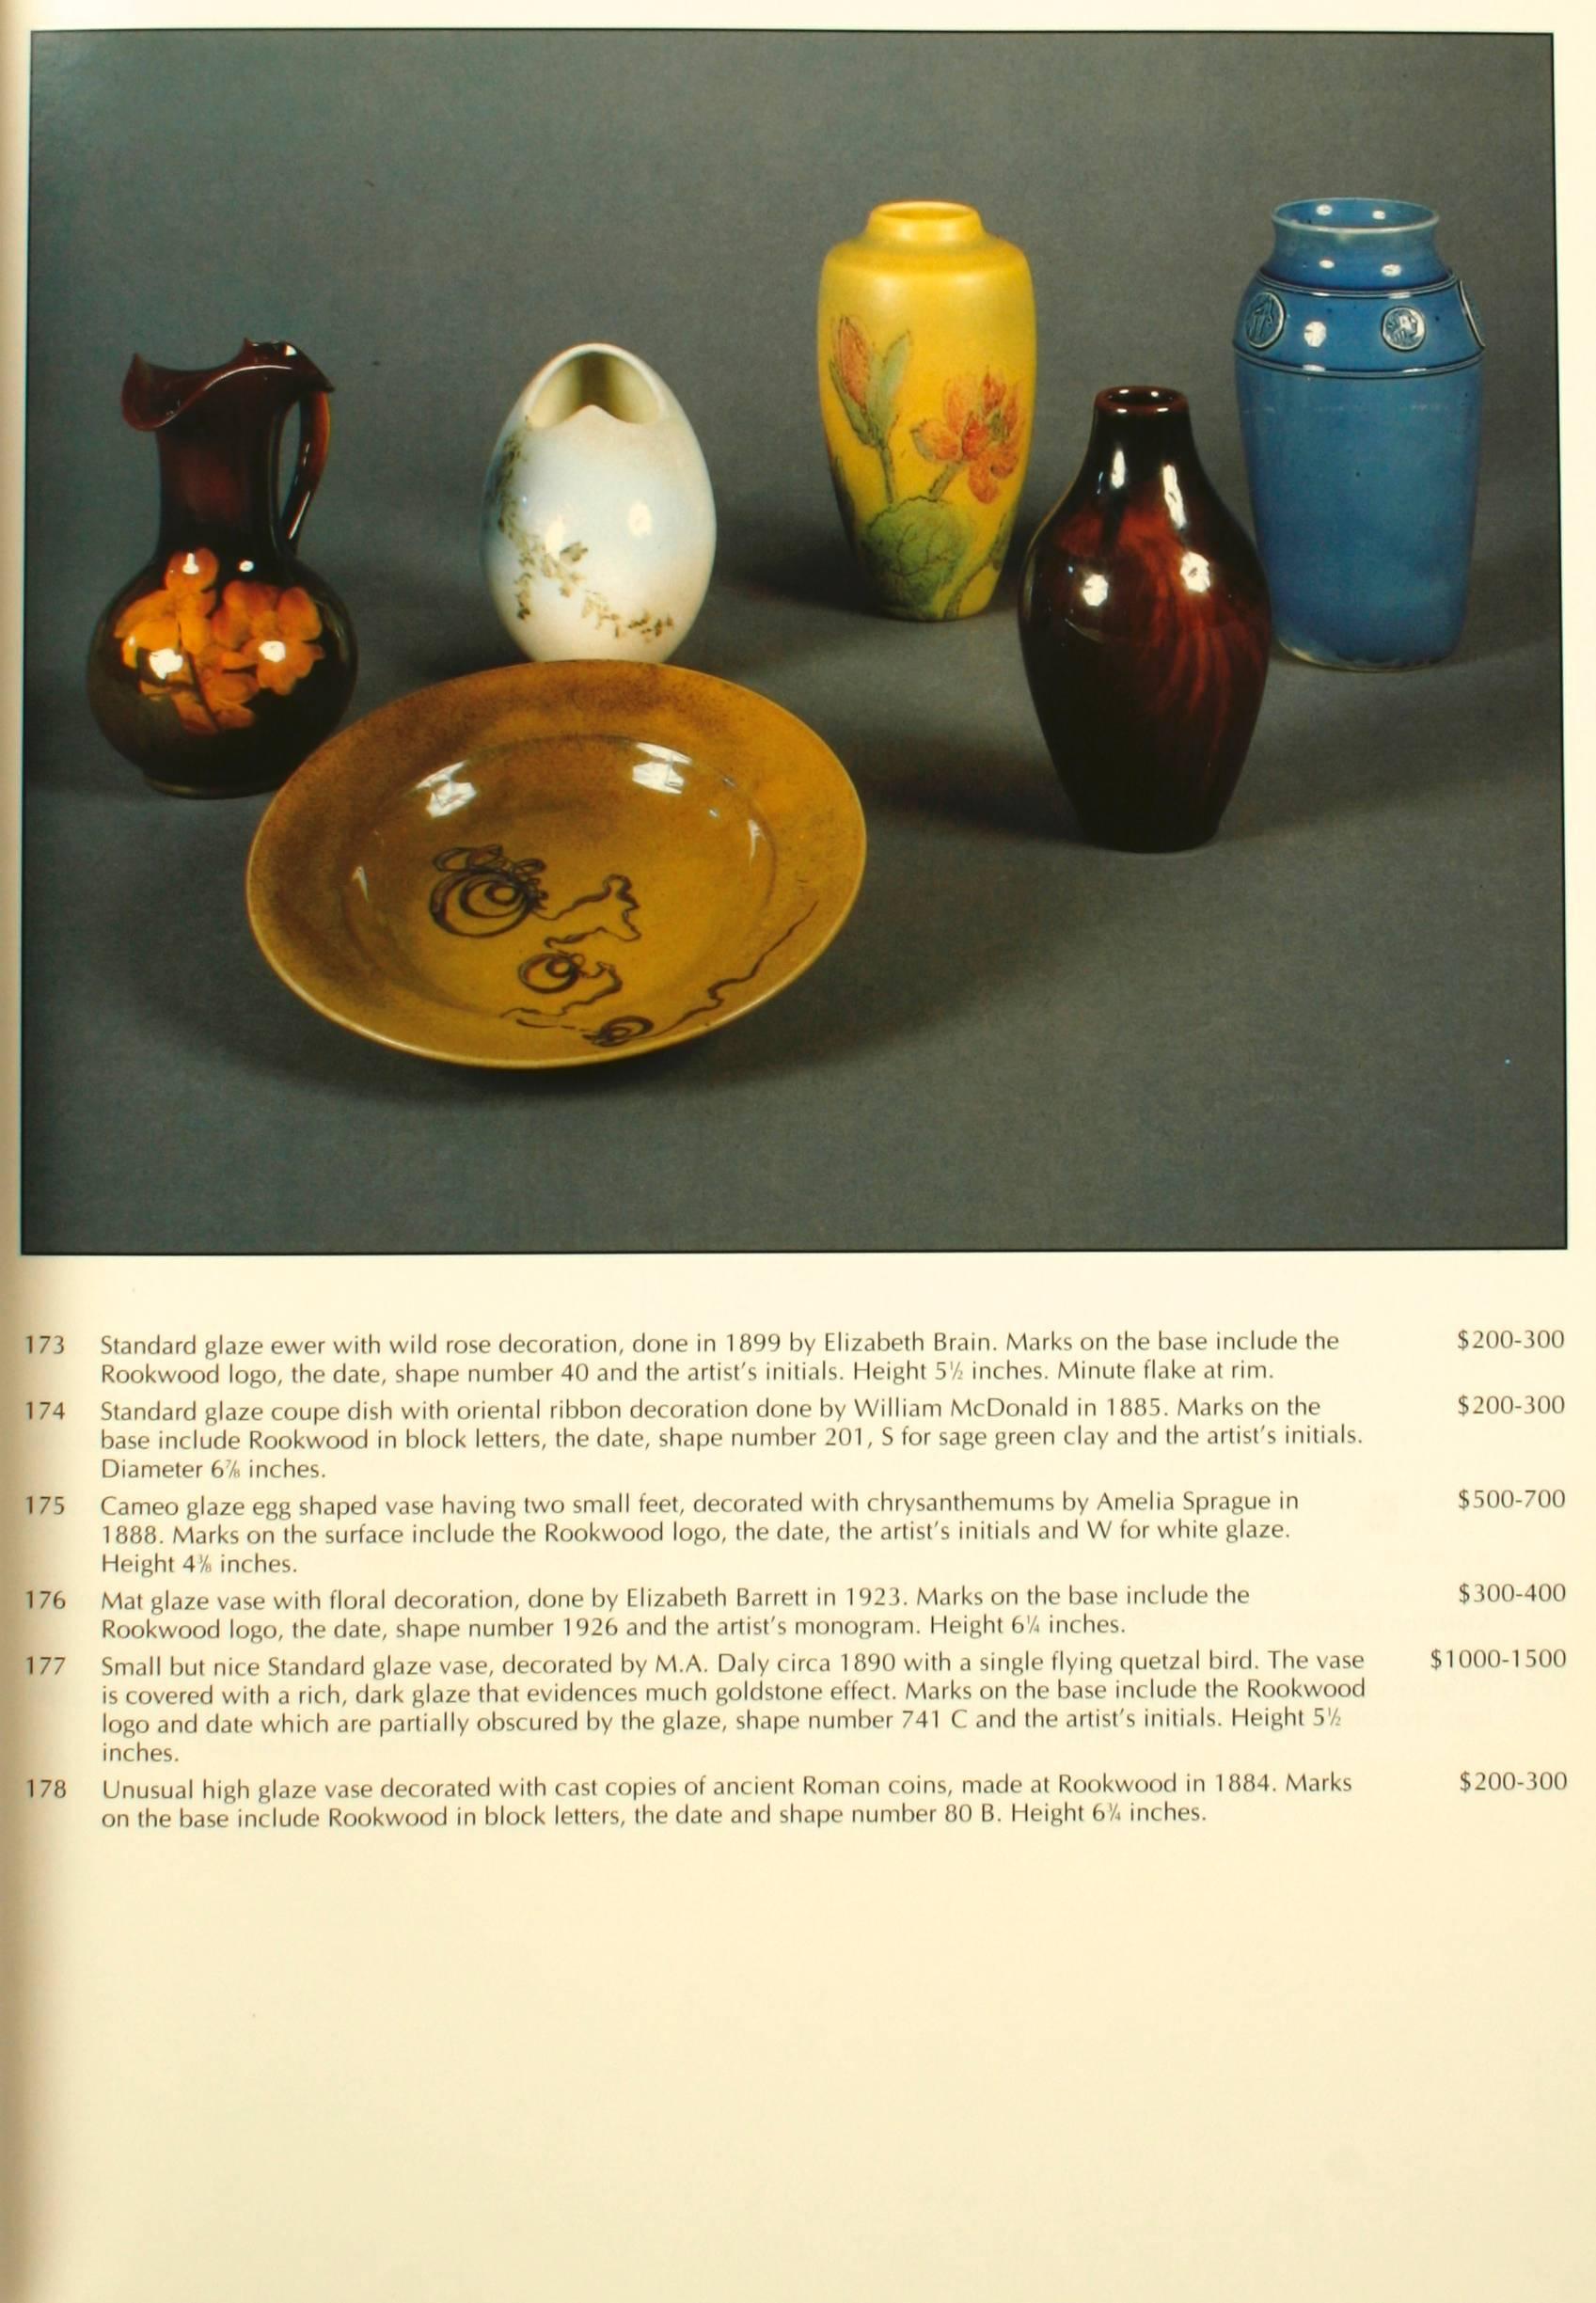 American Glover Collection Rookwood Pottery by Cincinnati Art Galleries, 1st Ed For Sale